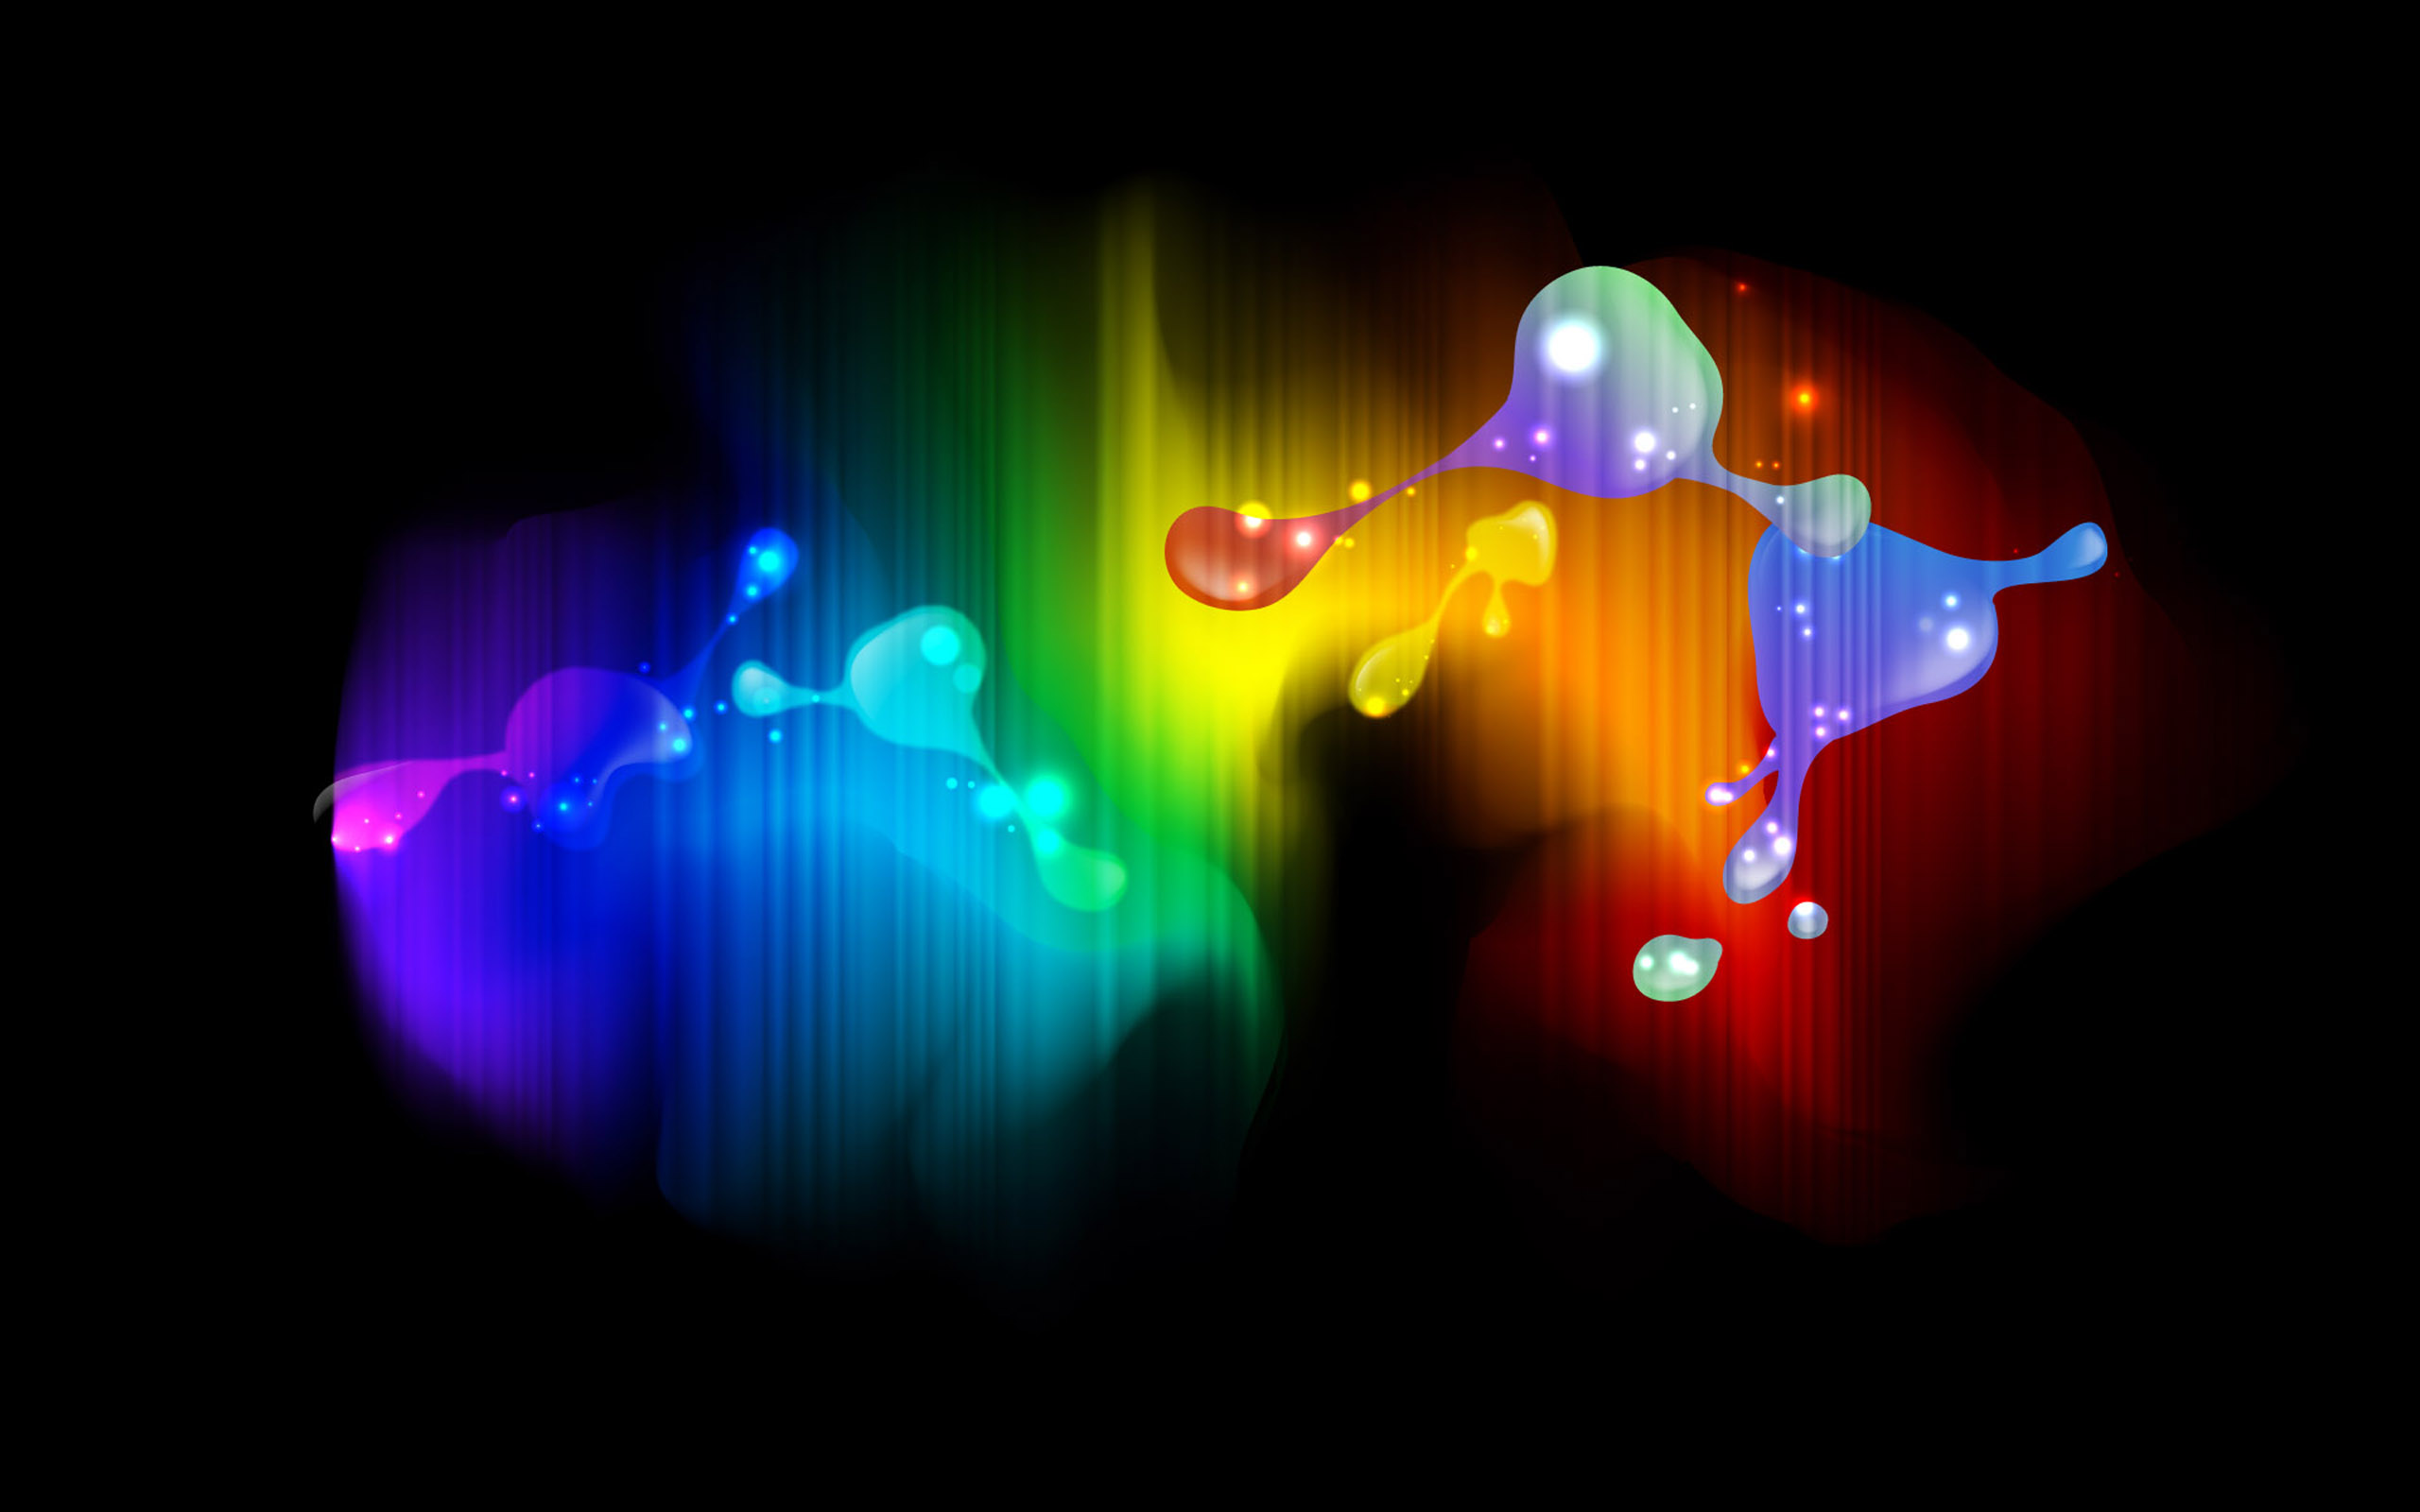 Colorful Abstract Wallpaper 2055 Hd Wallpapers in Abstract   Imagesci